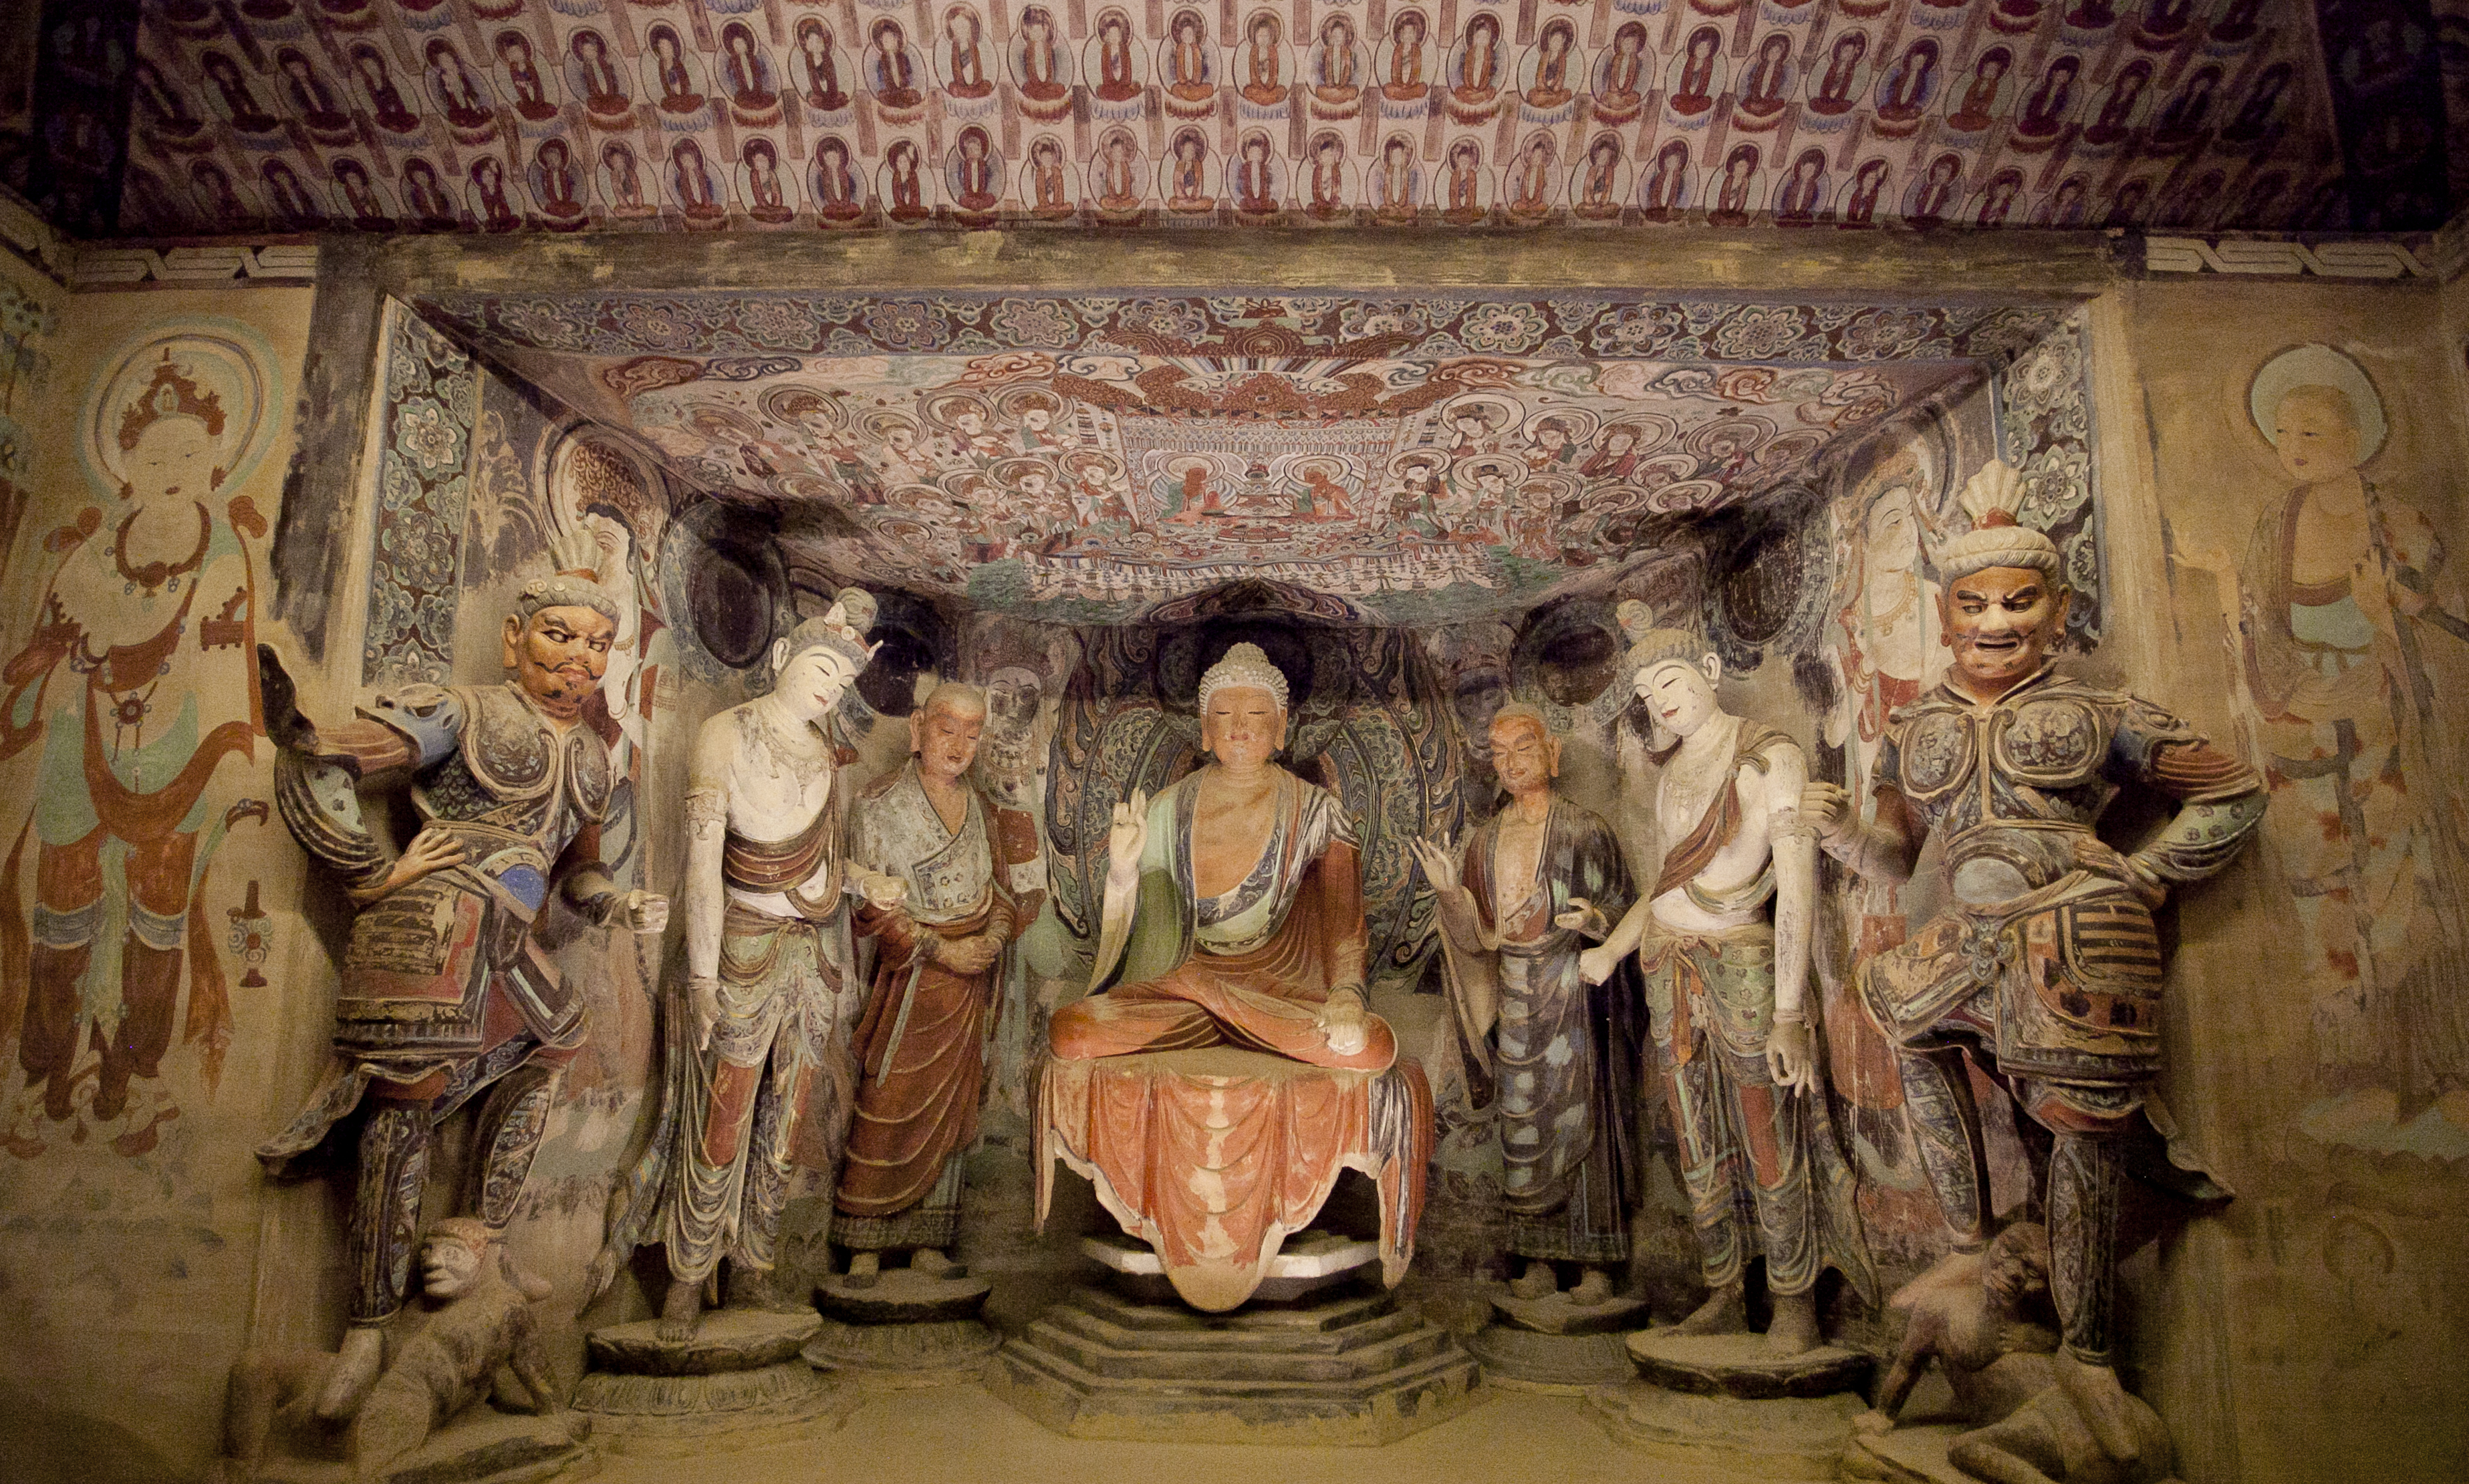 Buddhist septad in the main niche, Mogao Cave 45, High Tang period (705–781), replicated in paint and fiberglass by Zhang Li and Li Lin in 2004. (Samira Bouaou/Epoch Times)